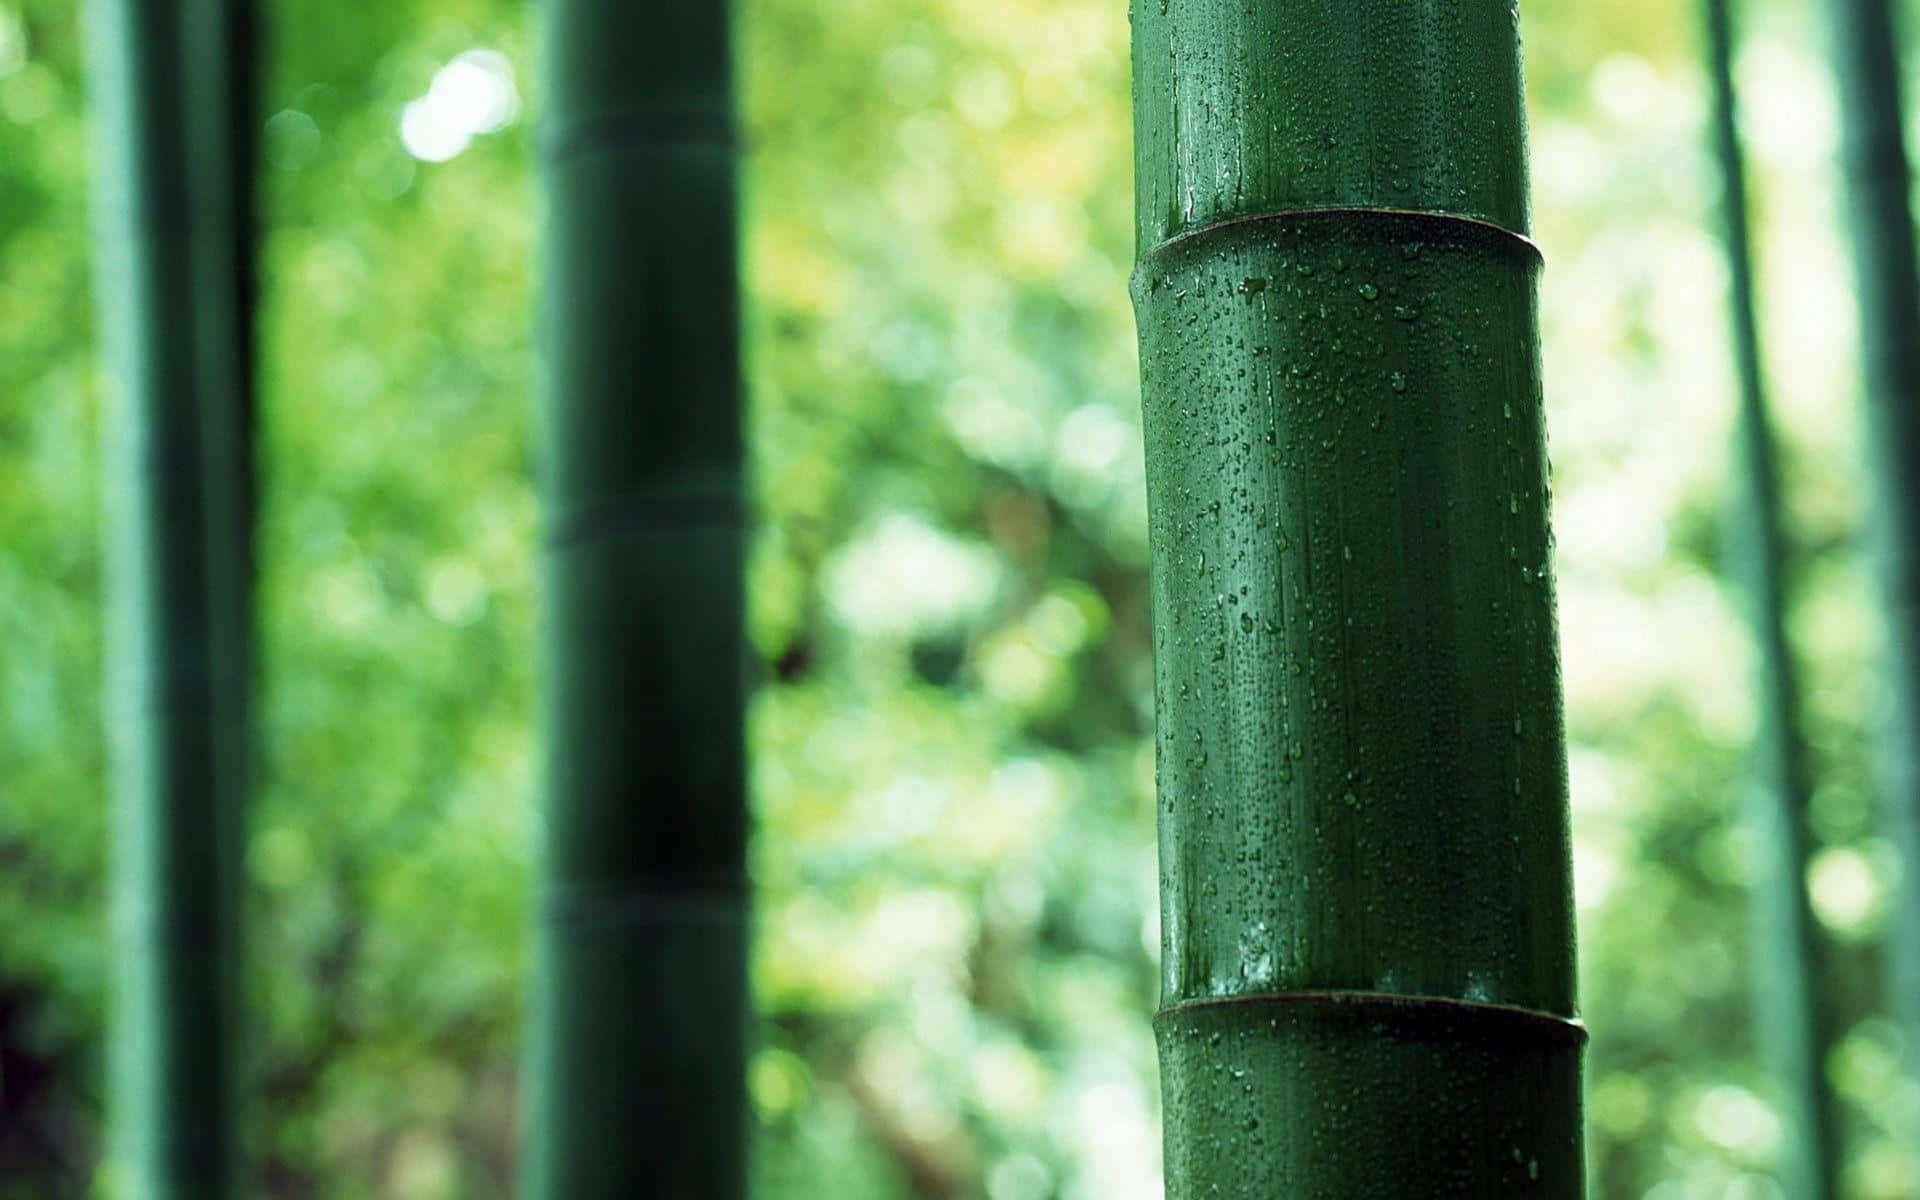 Bamboo Trees In The Forest Wallpaper